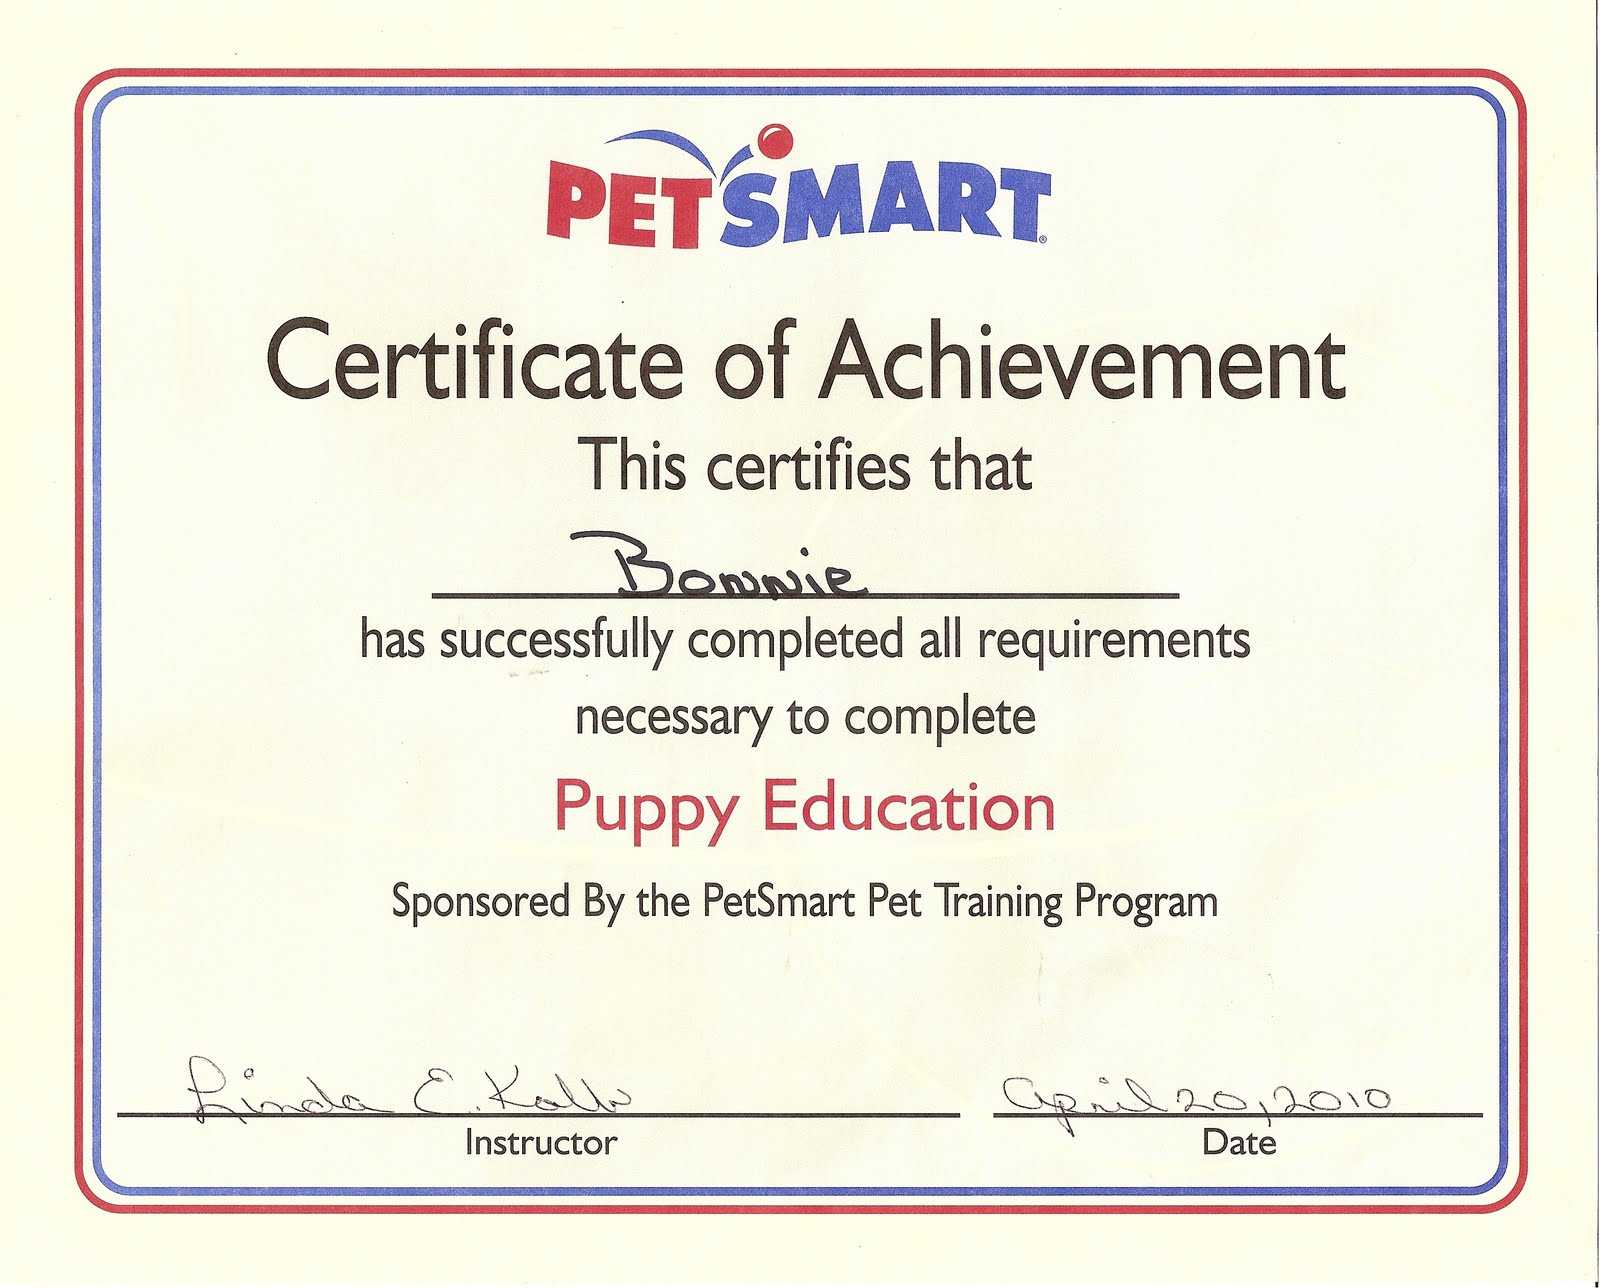 Dog Obedience Graduation Certificate ~ Get Dog Training Advise Within Service Dog Certificate Template